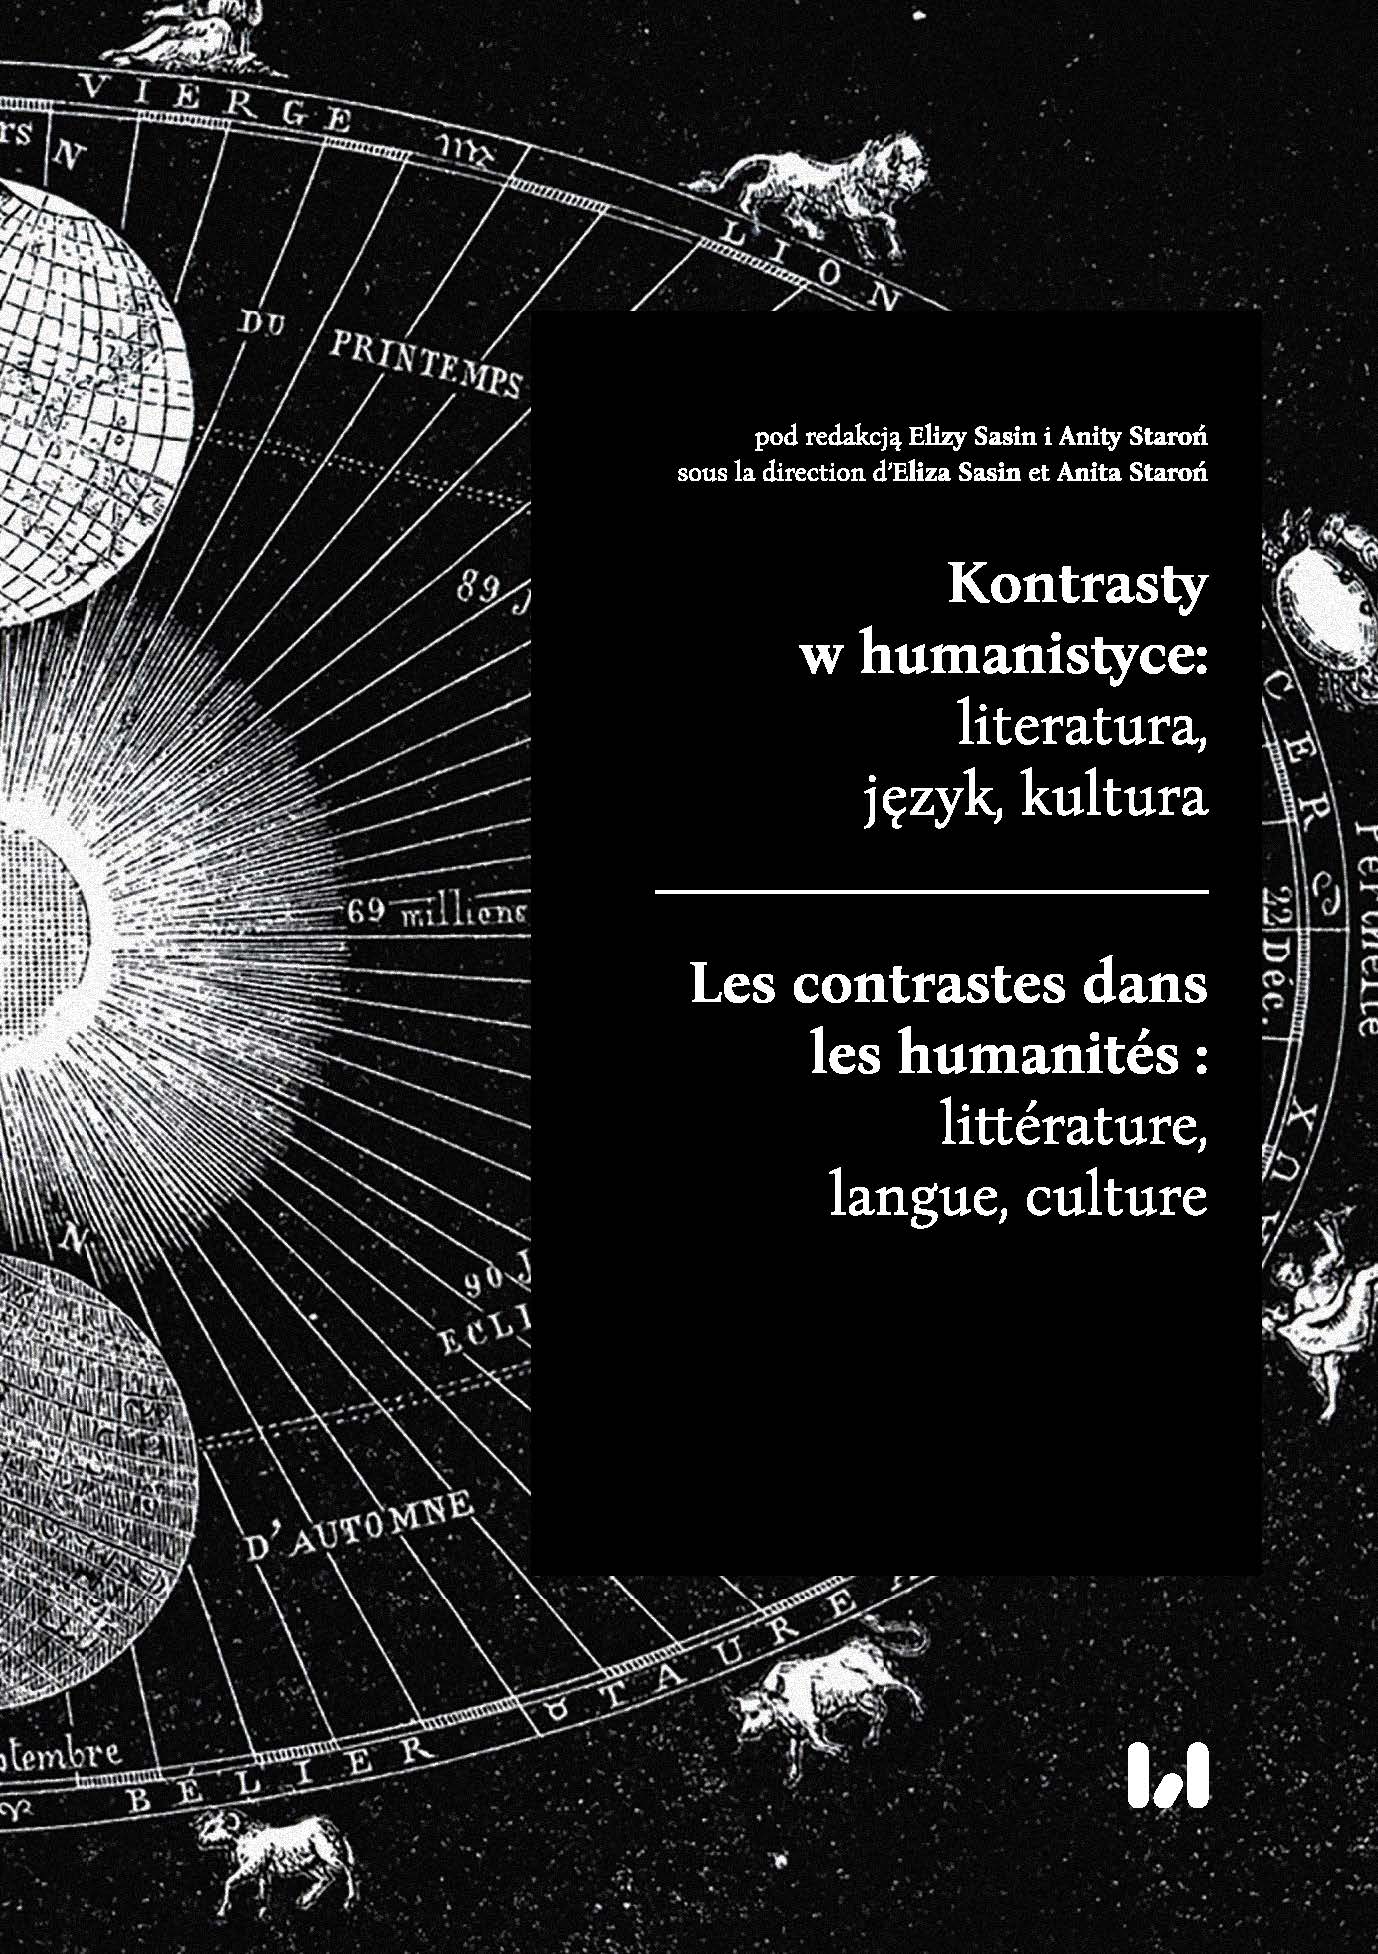 Contrasts in humanities: literature, language, culture